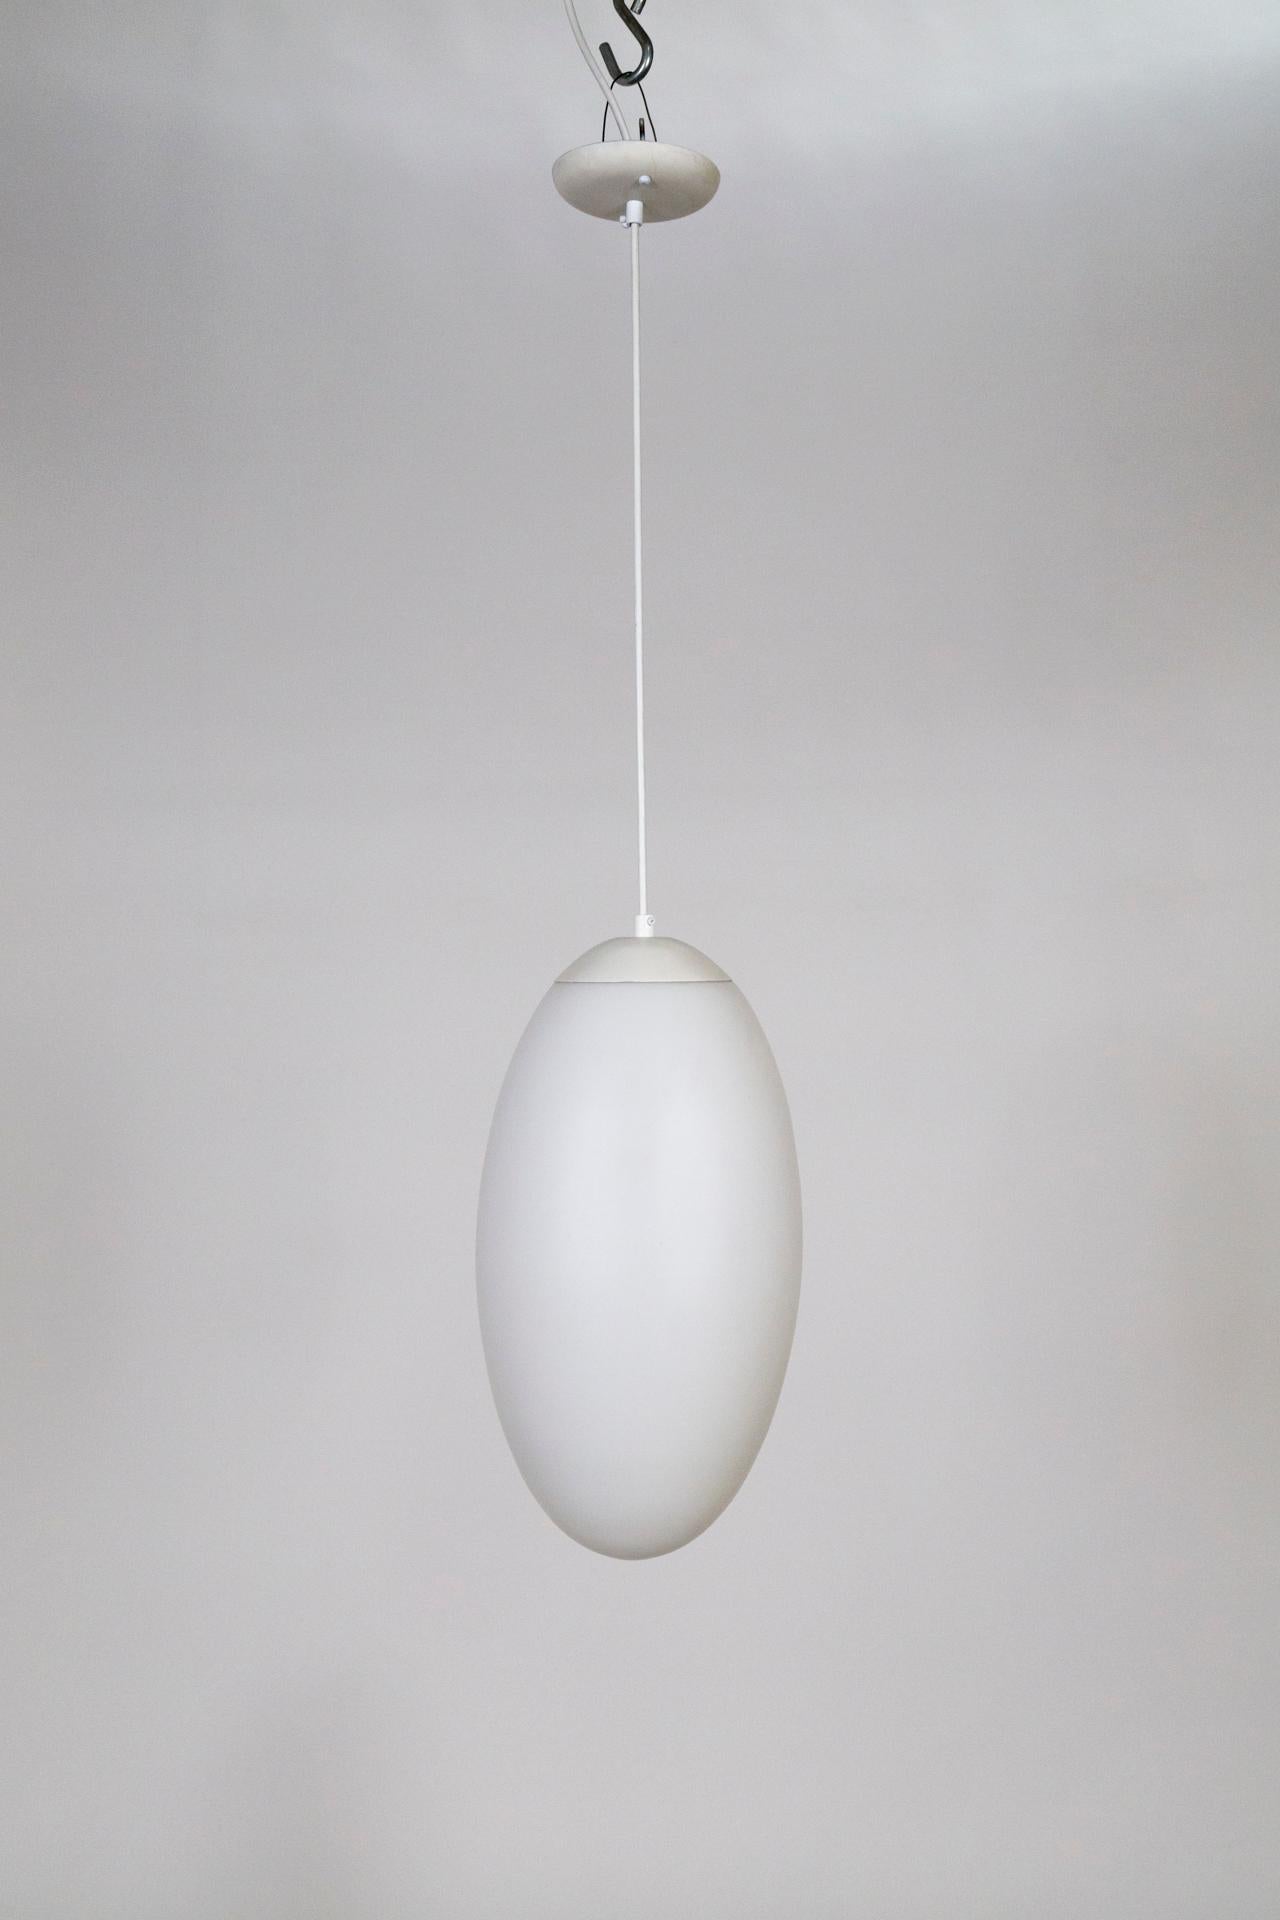 Long, oval shaped, milk glass pendant; seamlessly capped with white steal and cord. Made by Prescolite; rare and in great condition. Original canopy with maker's mark. Can be hung indoors or out. Measures: 20